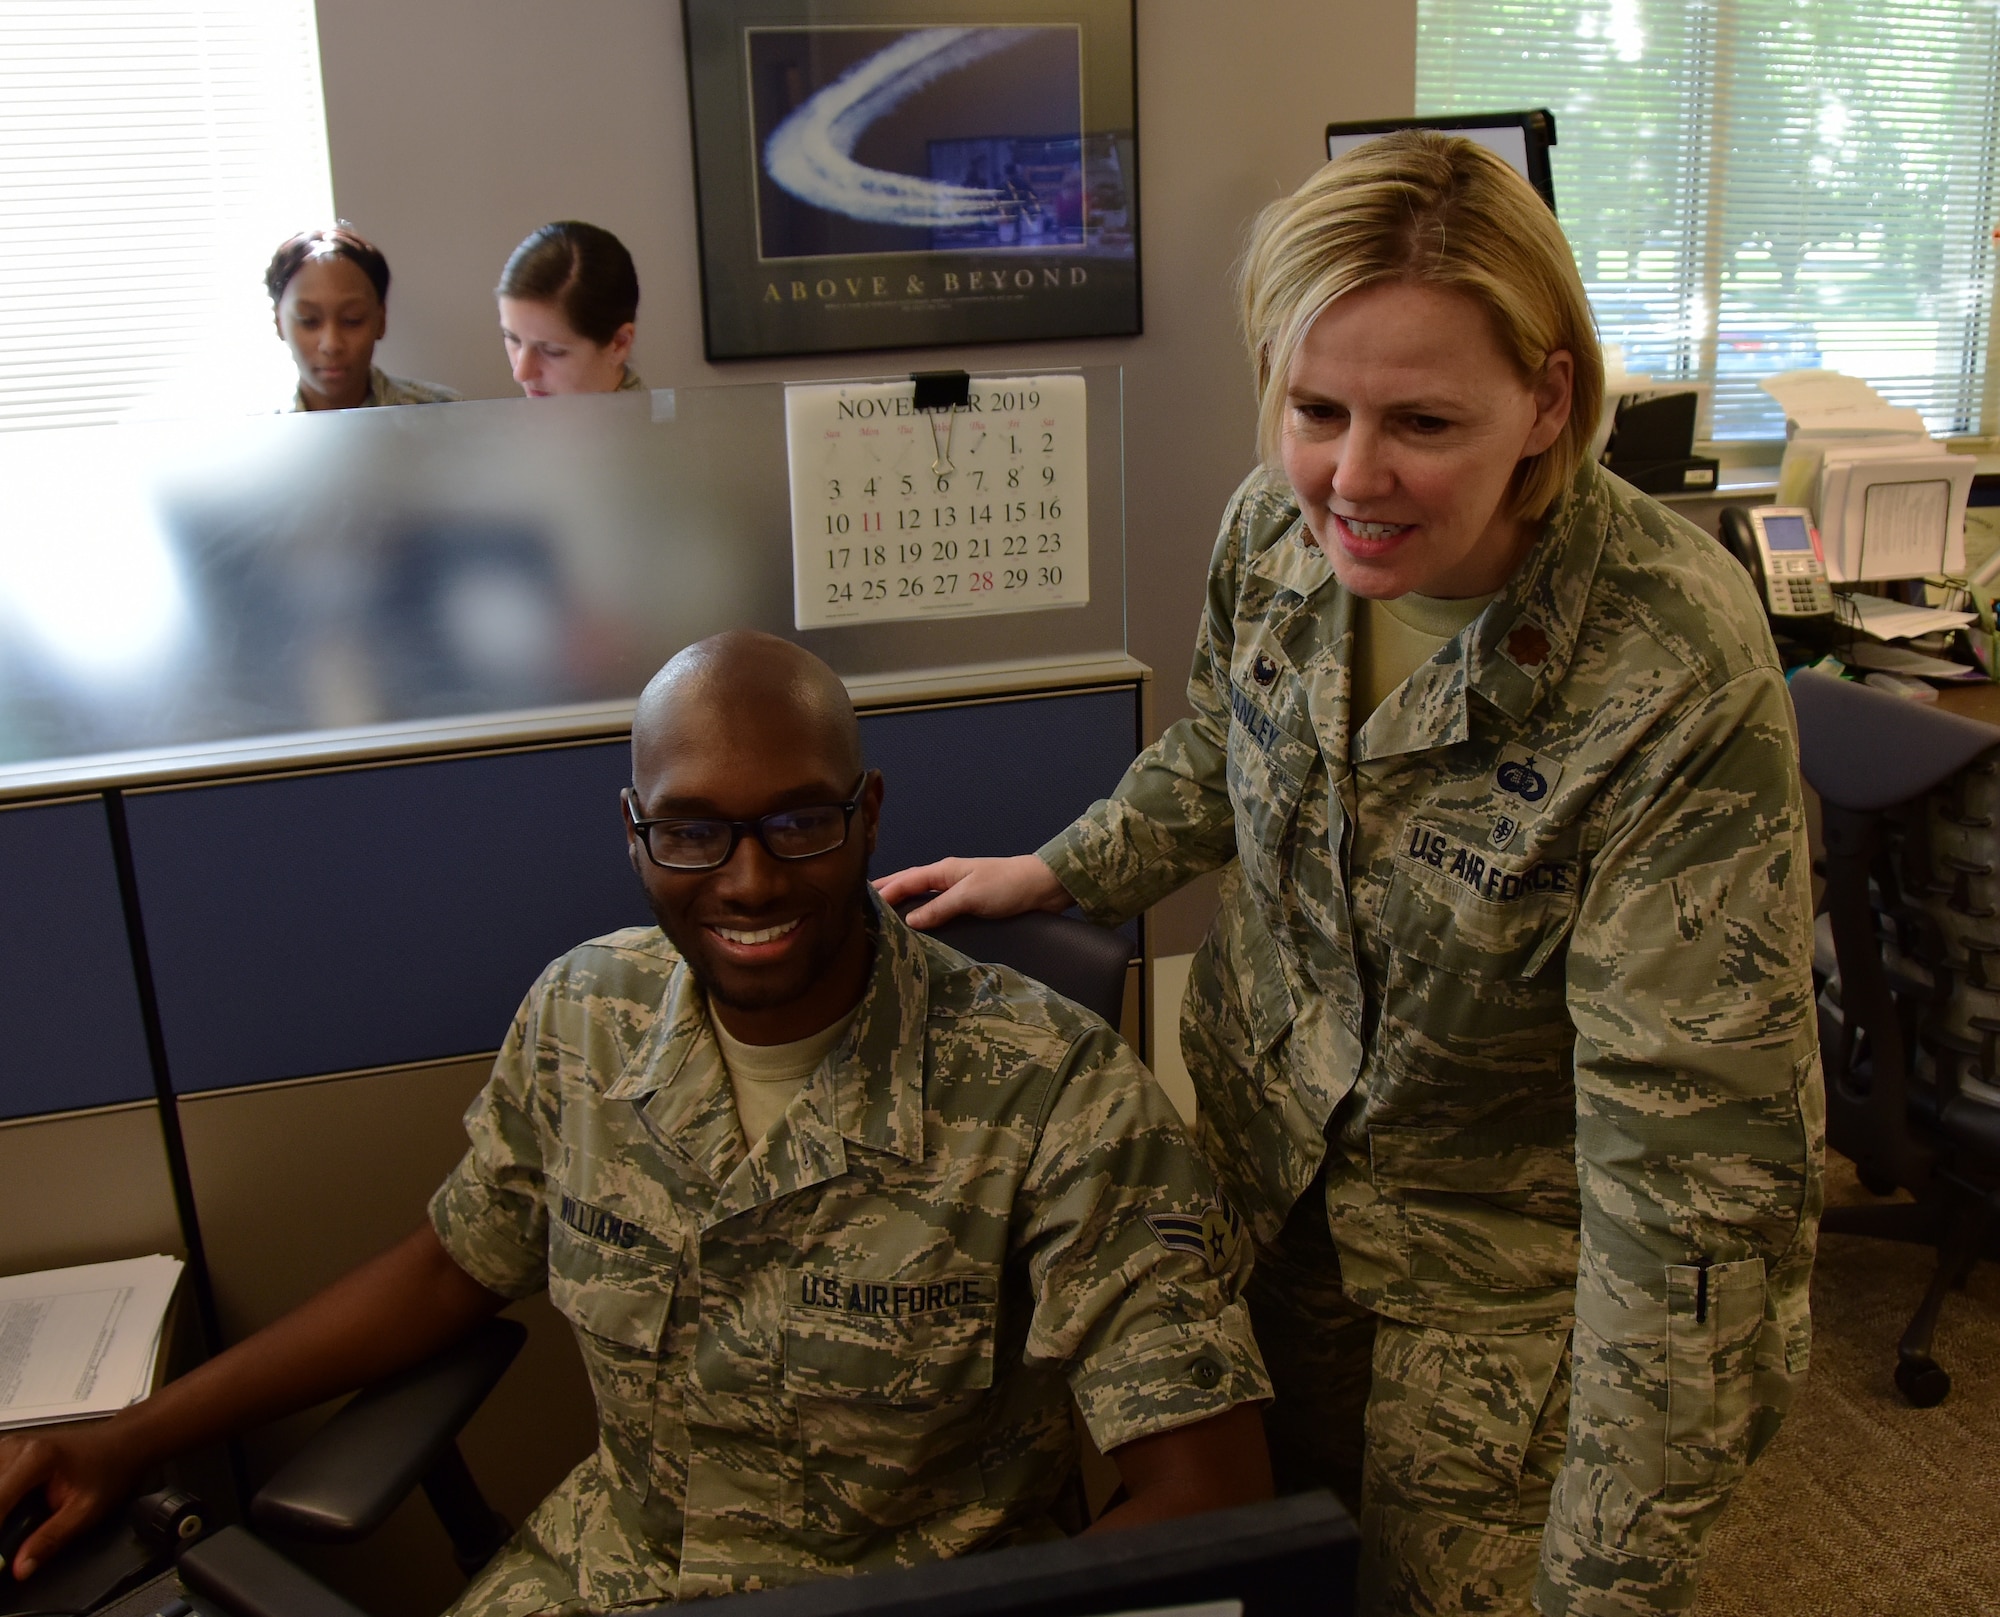 U.S. Air Force Maj. Melissa Danley, commander of the 118th Force Support Squadron, Tennessee Air National Guard, examines the work of Airman 1st Class Willie Williams, a personnelist with the 118th FSS, May 14, 2019 at Berry Field Air National Guard Base, Nashville, Tennessee.